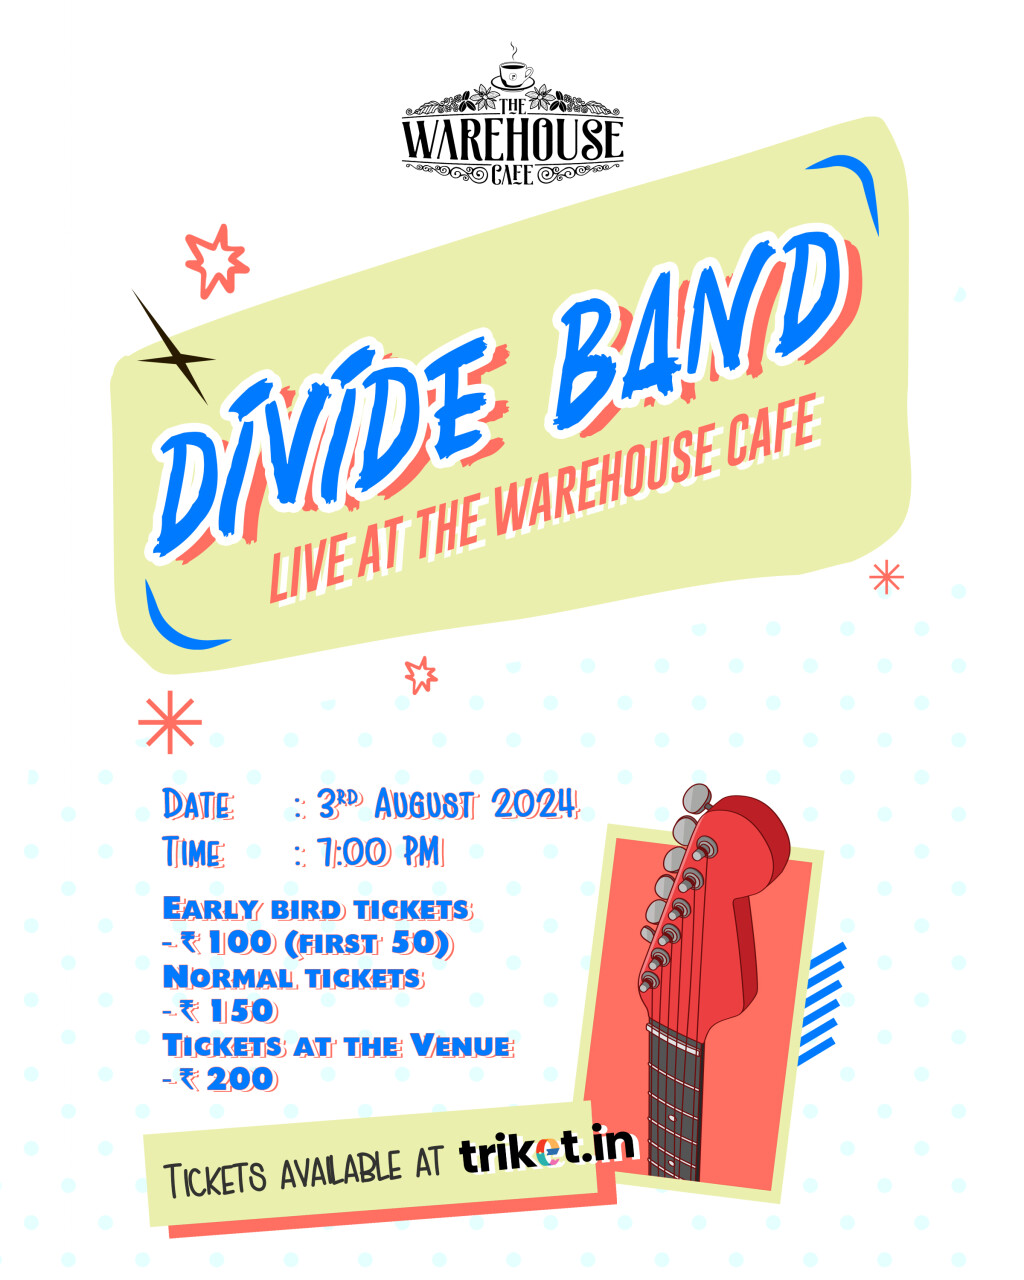 Divide Band | Live at The Warehouse Café